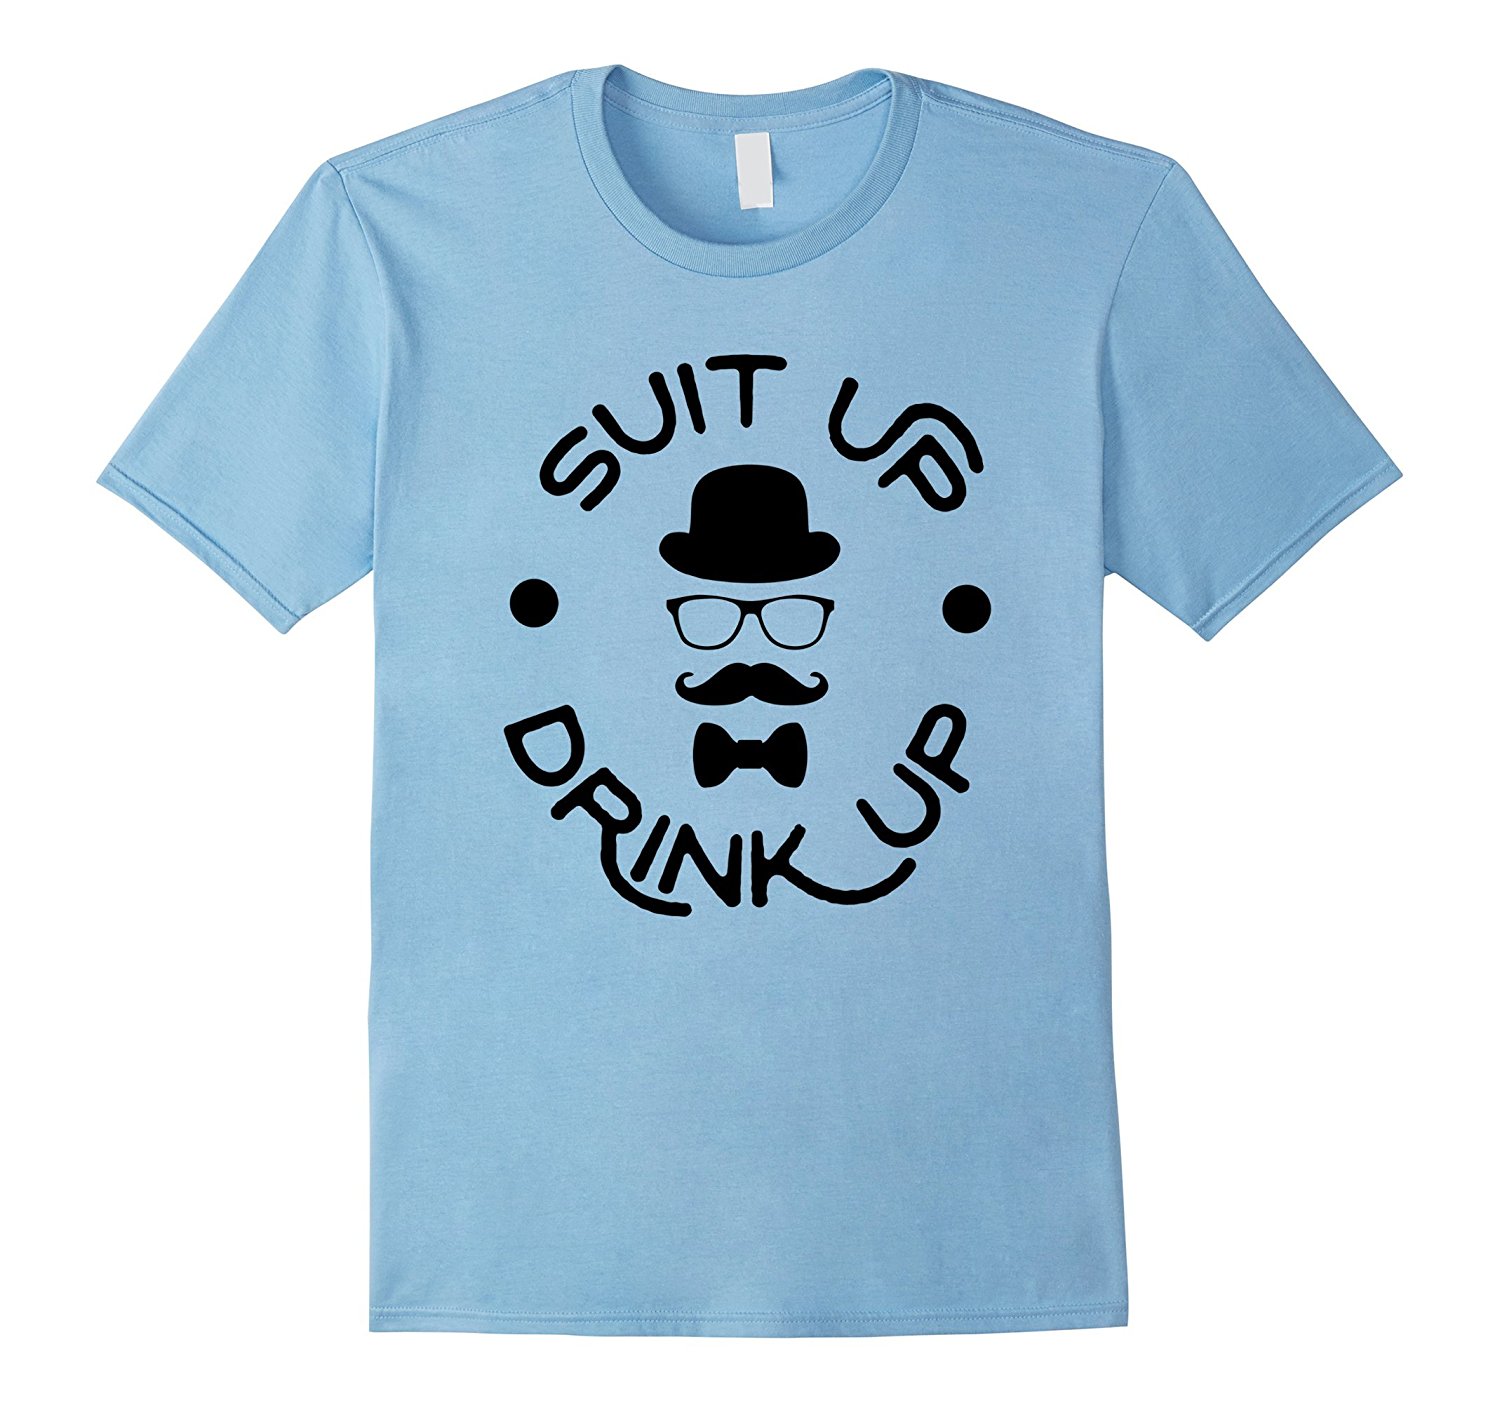 bachelor party shirts, bachelor party t shirts, bachelor shirts, bachelor party